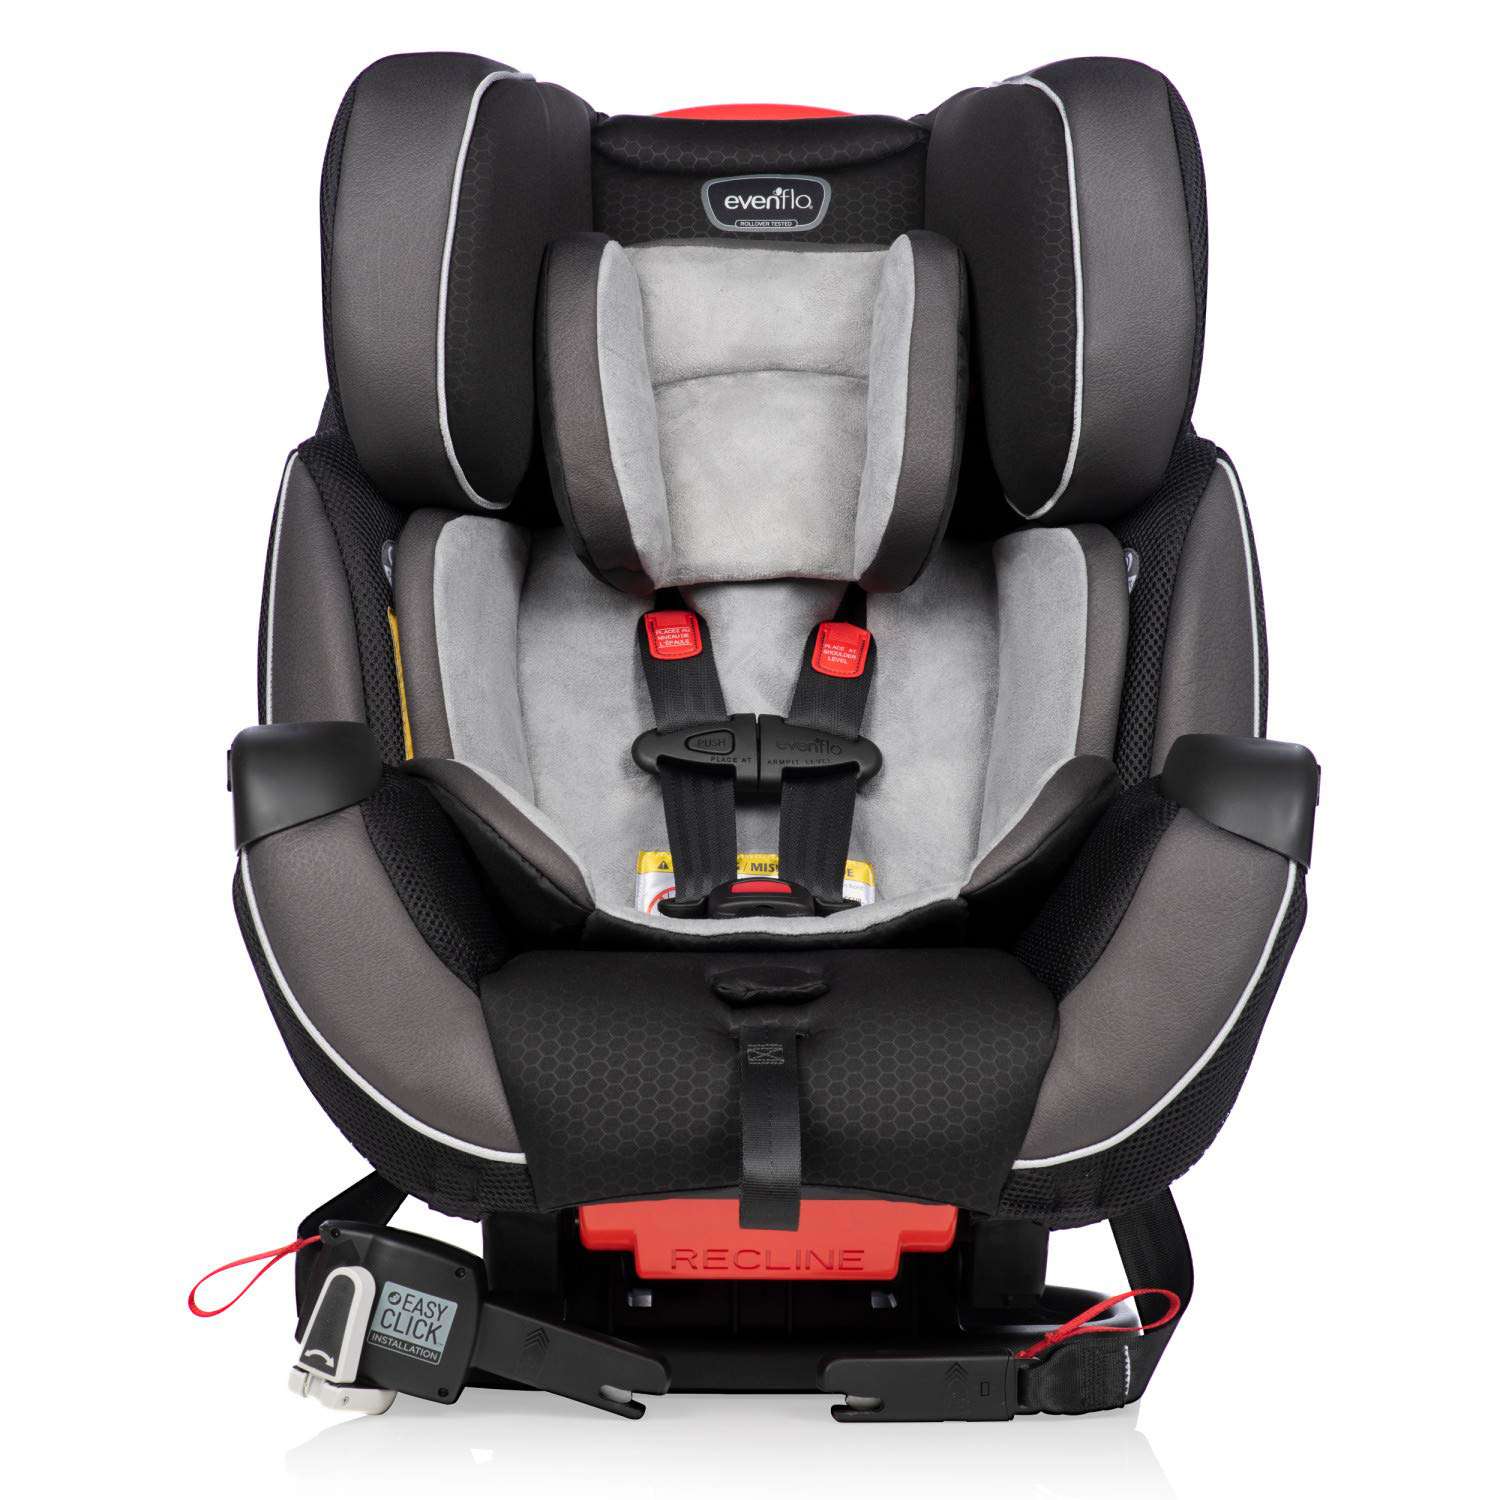 Best Convertible Car Seat for Legroom